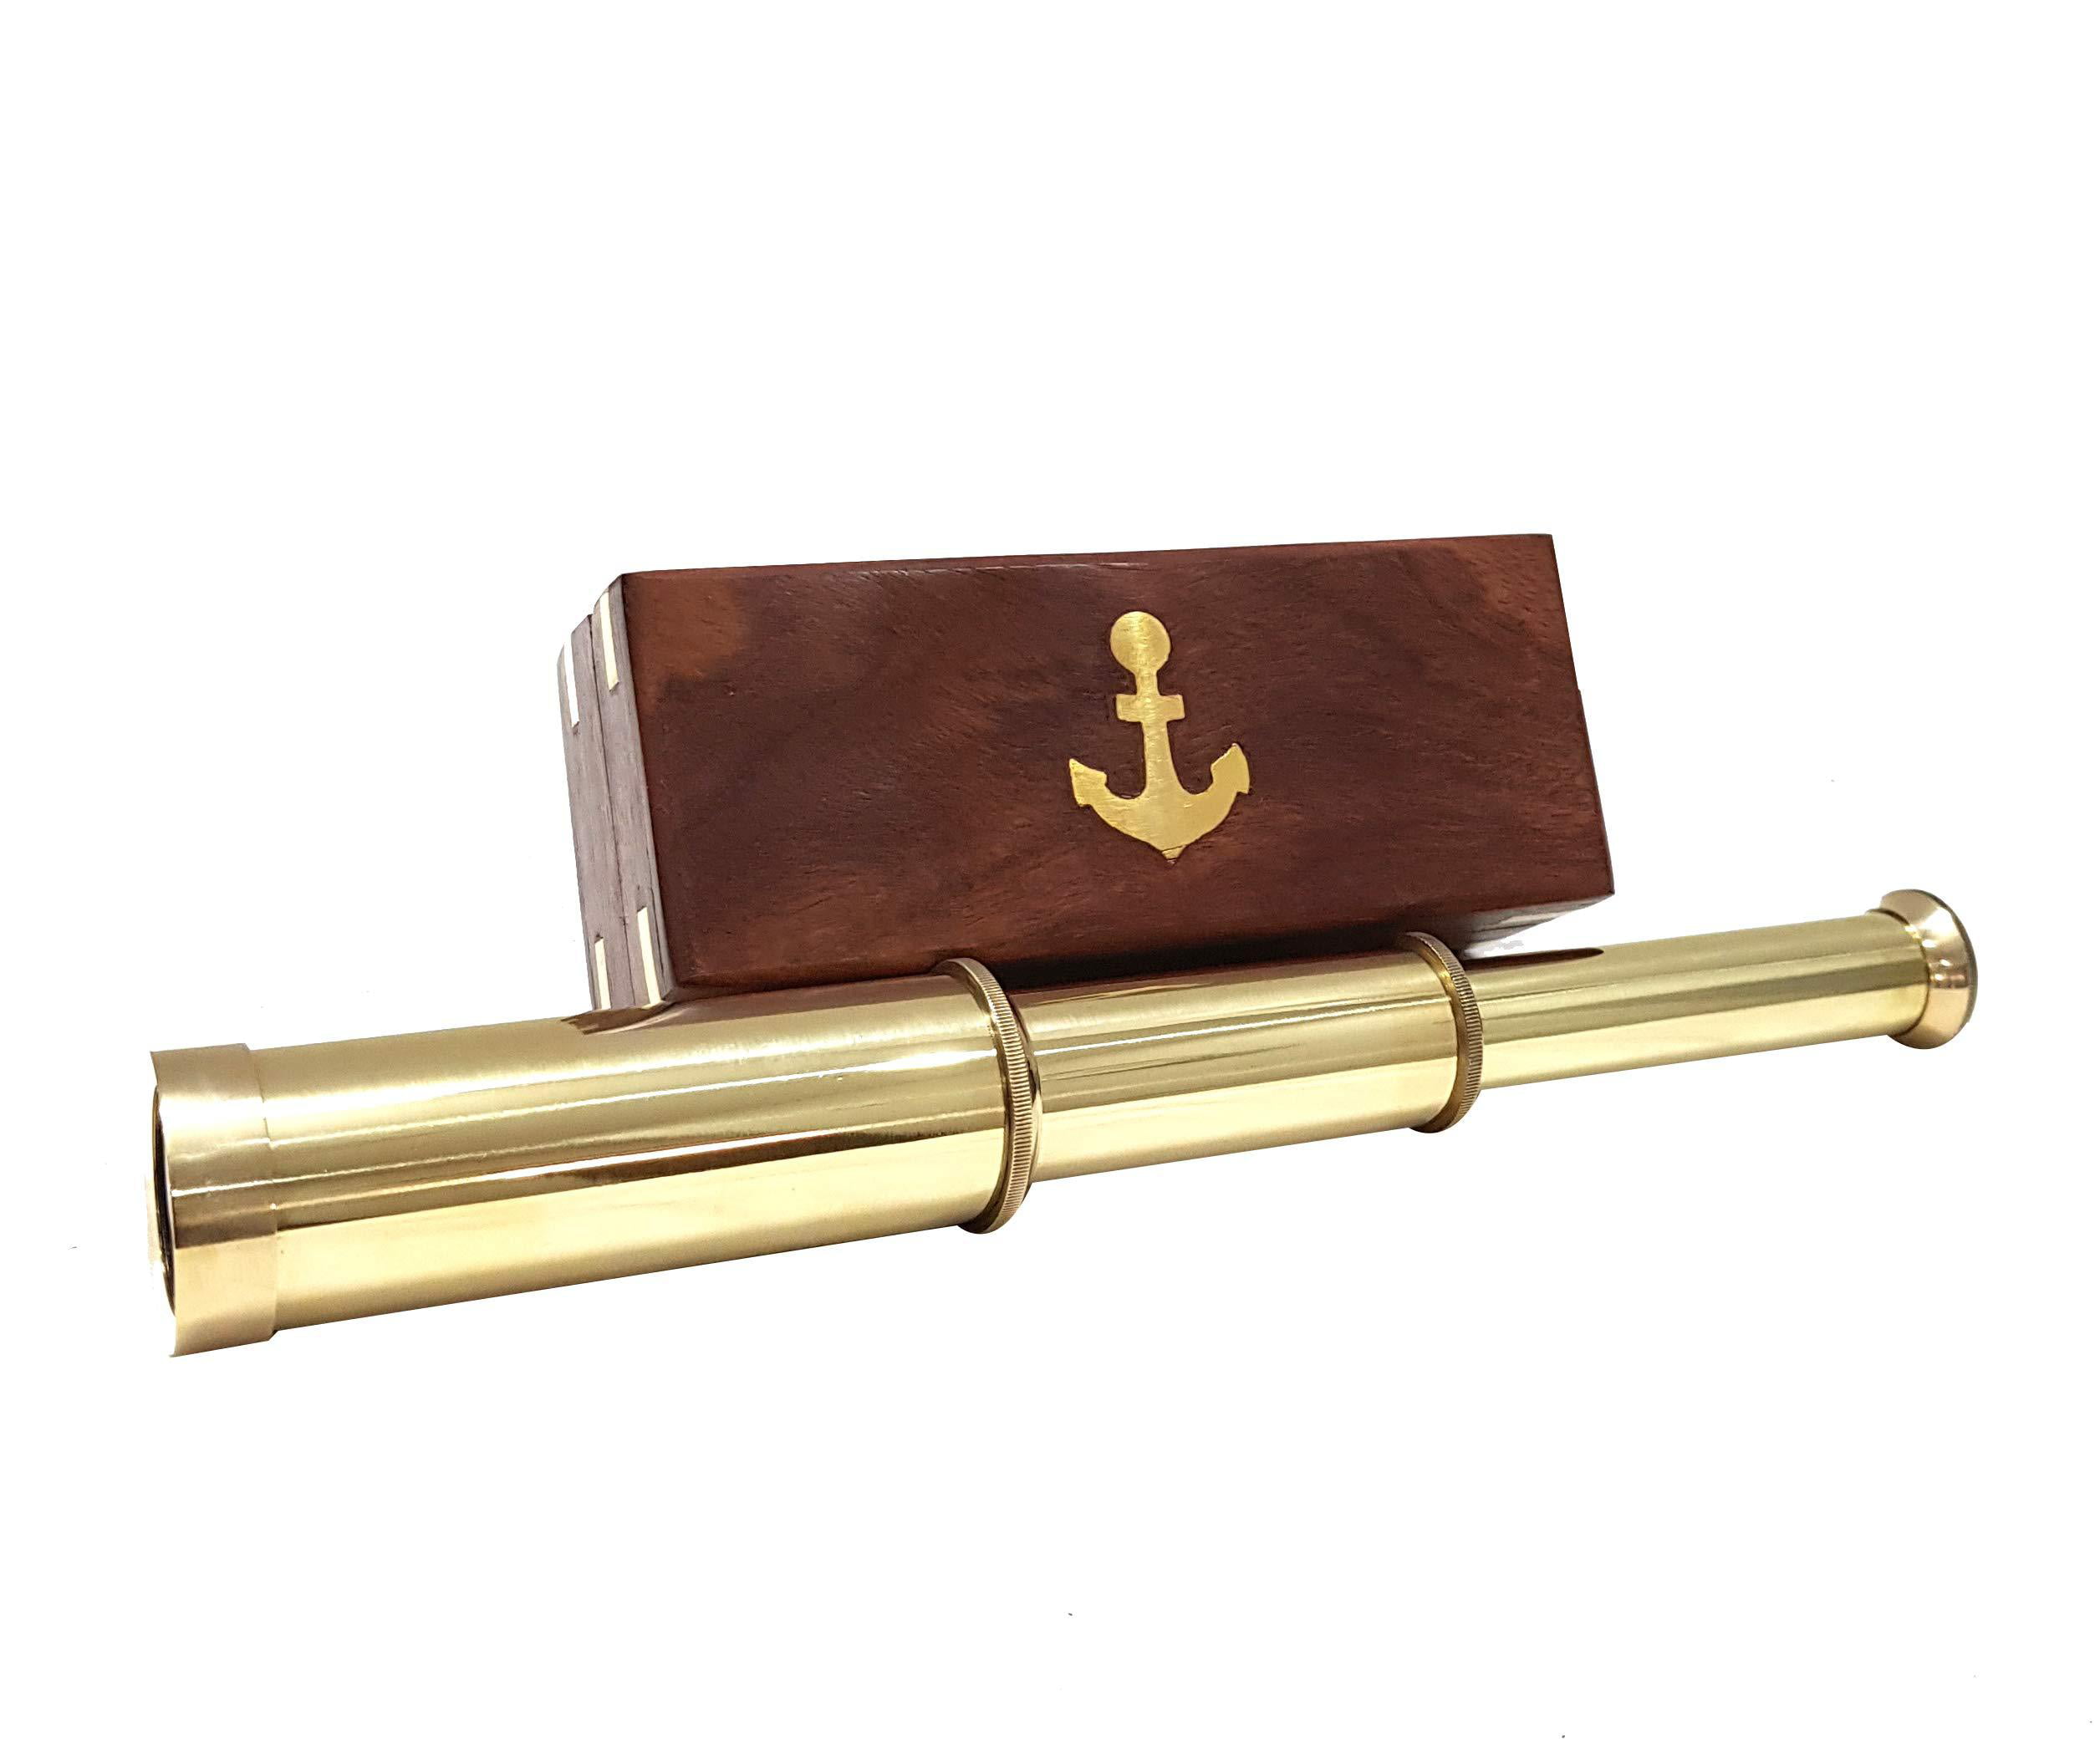 Details about   Nautical Antique Brass Telescope With Antique Brass Stand Collectible Desk Decor 